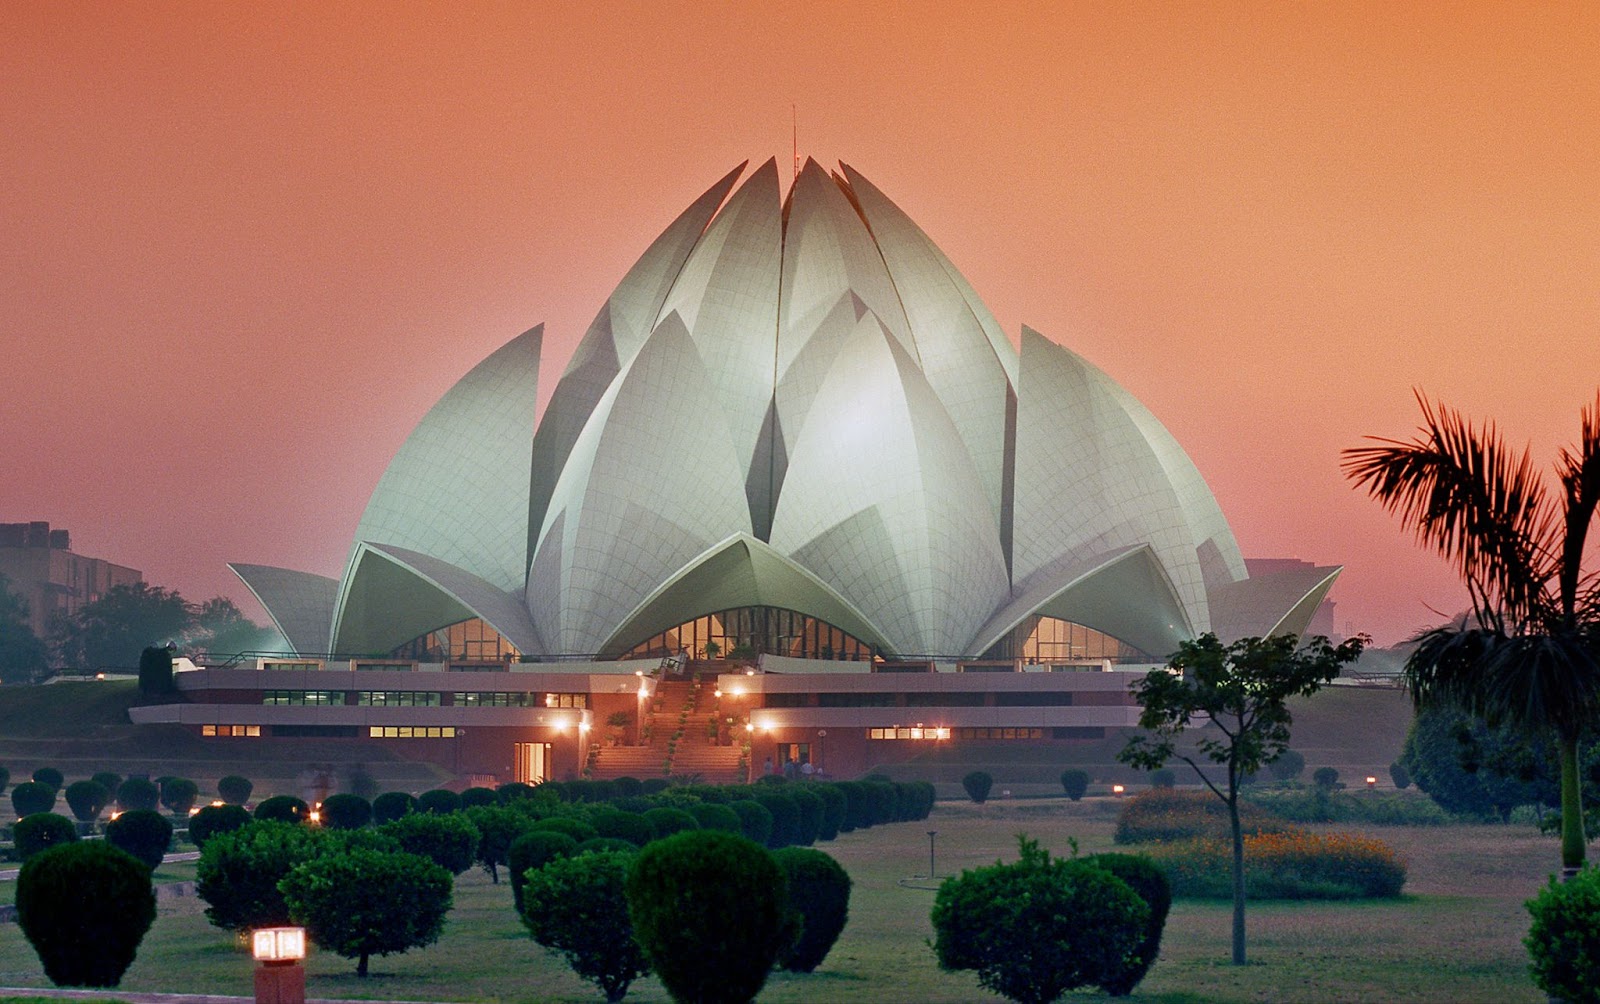 photo shows view of the Lotus Temple